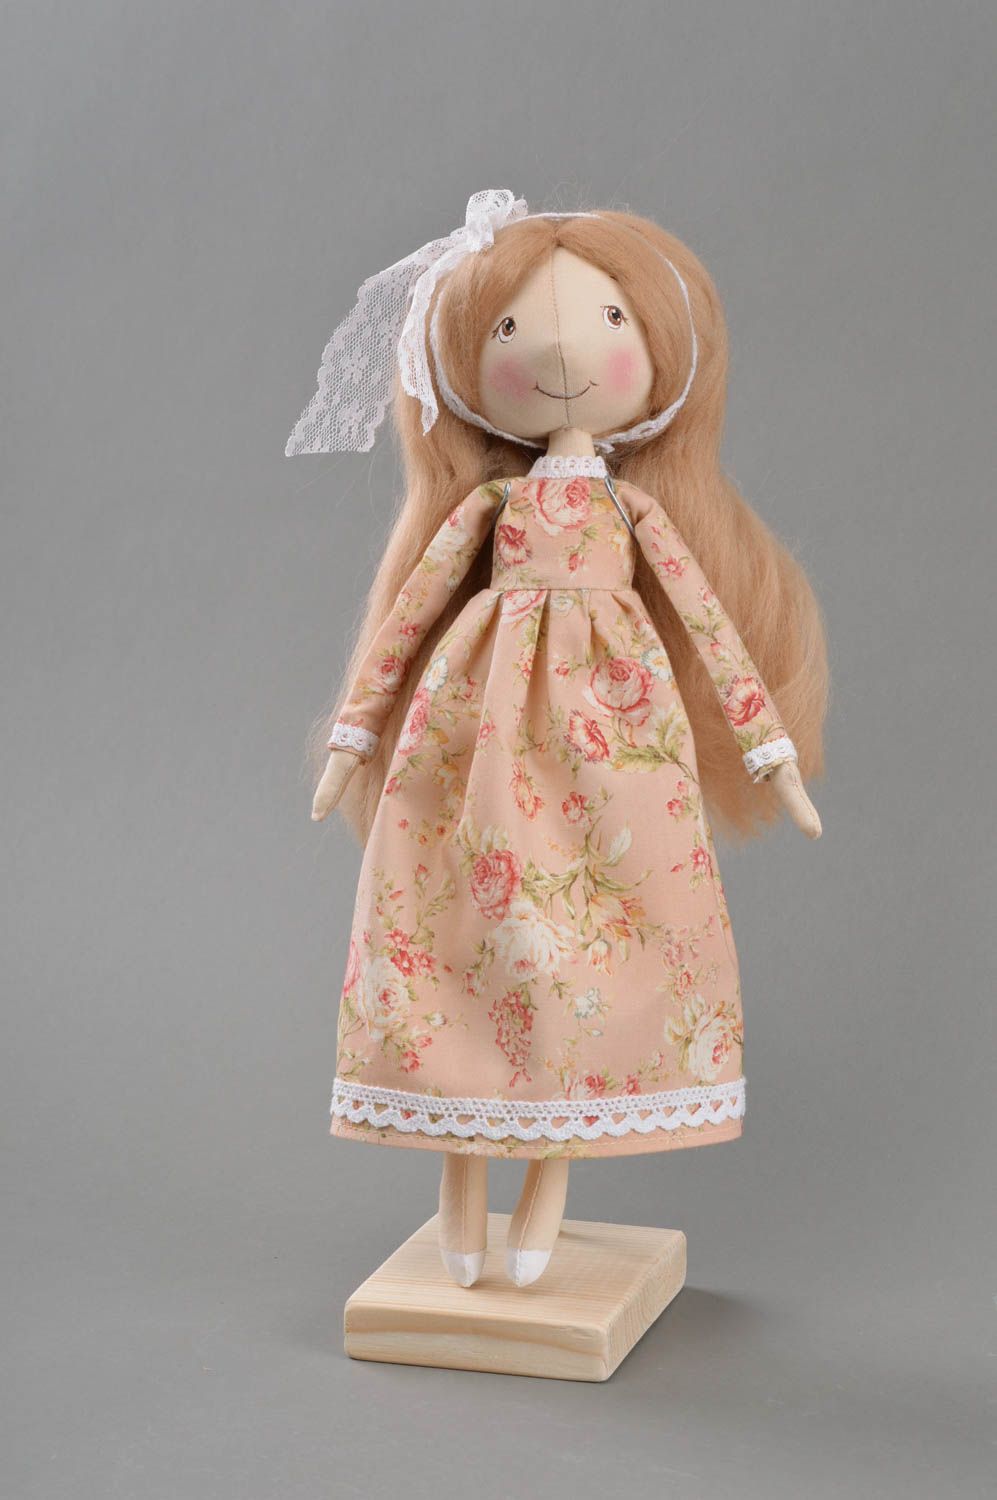 Handmade cute toy doll made of fabric in dress with flower print on stand photo 1